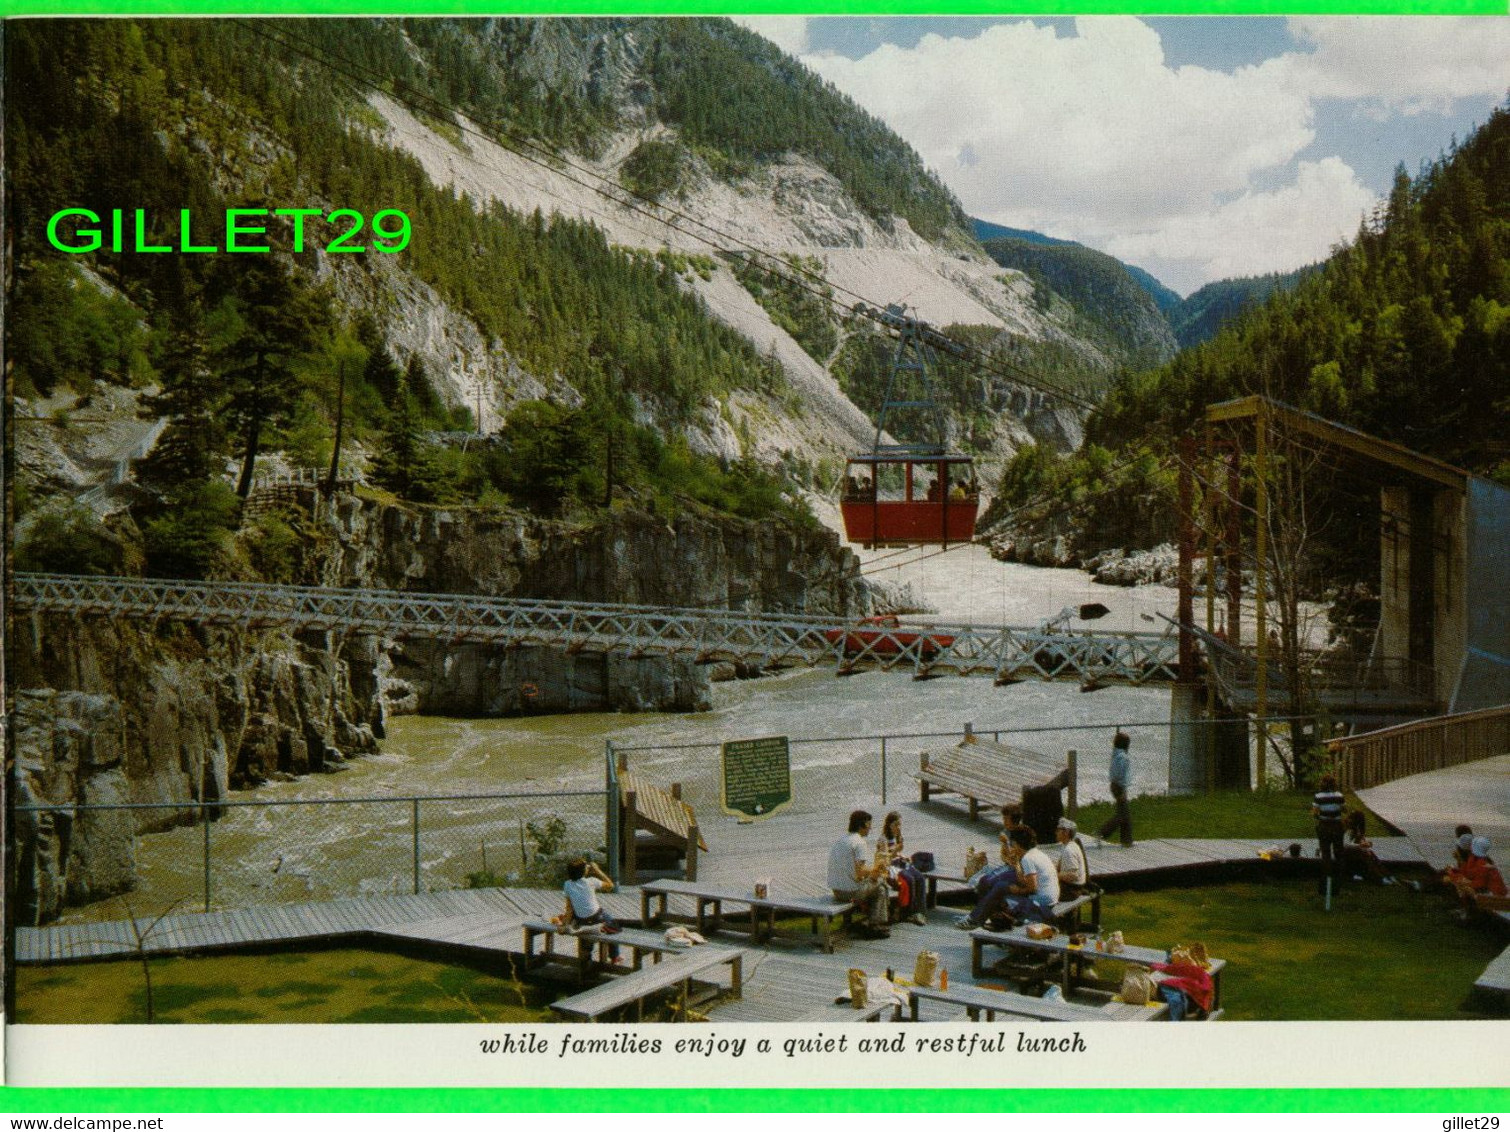 A SOUVENUR ALBUM OF HELL'S GATE AIRTRAM, FRASER CANYON, BC IN 1978 - 20 PAGES - - North America